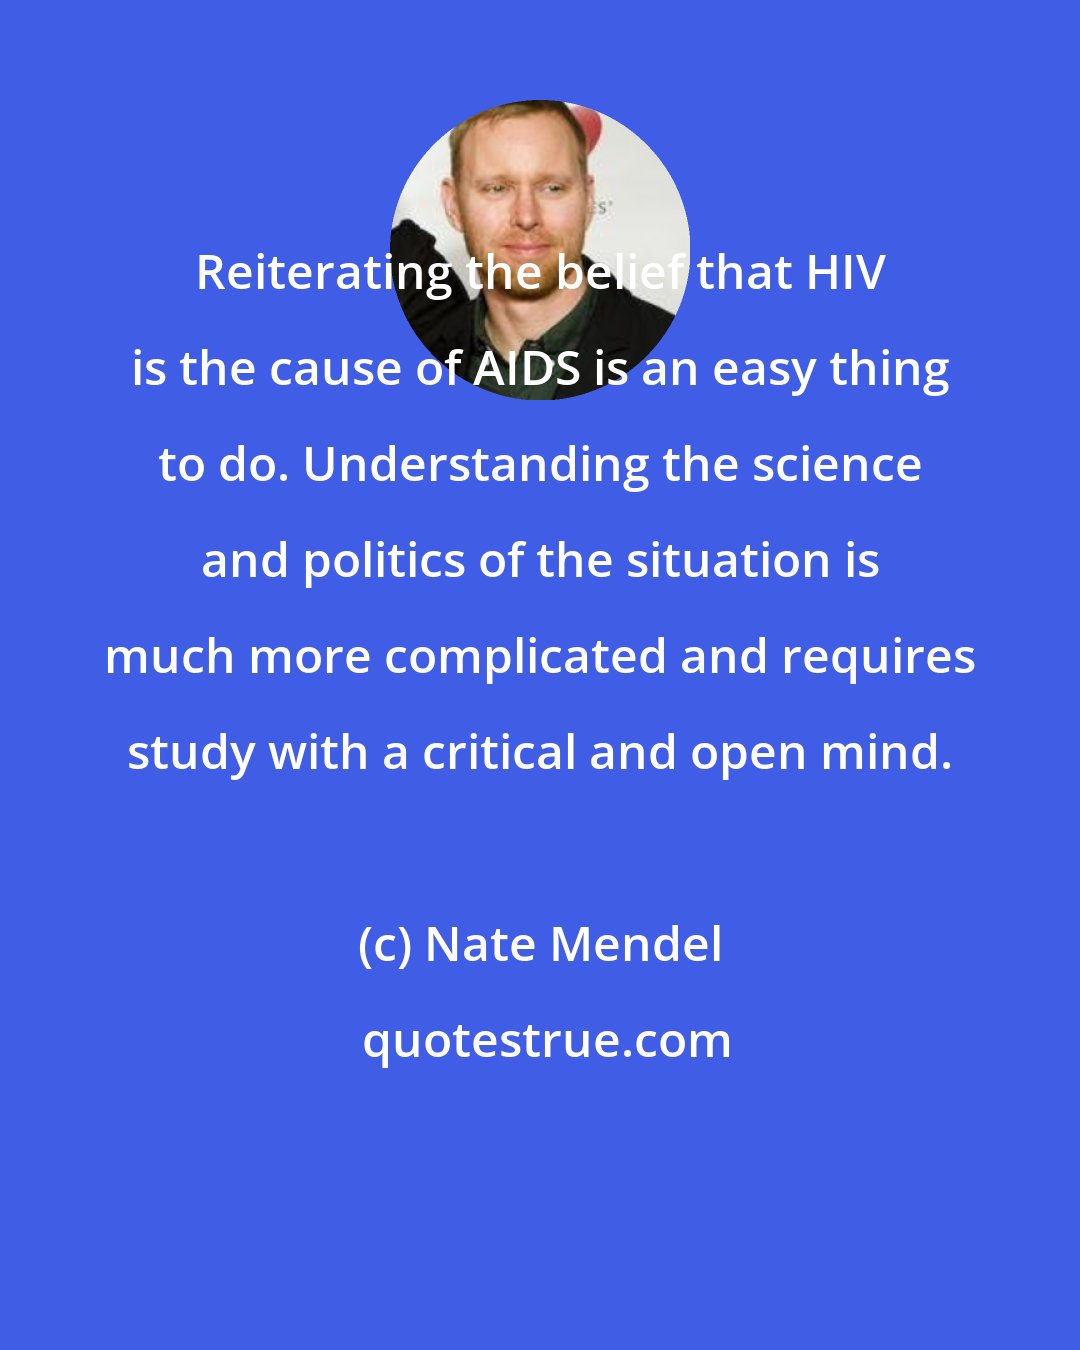 Nate Mendel: Reiterating the belief that HIV is the cause of AIDS is an easy thing to do. Understanding the science and politics of the situation is much more complicated and requires study with a critical and open mind.